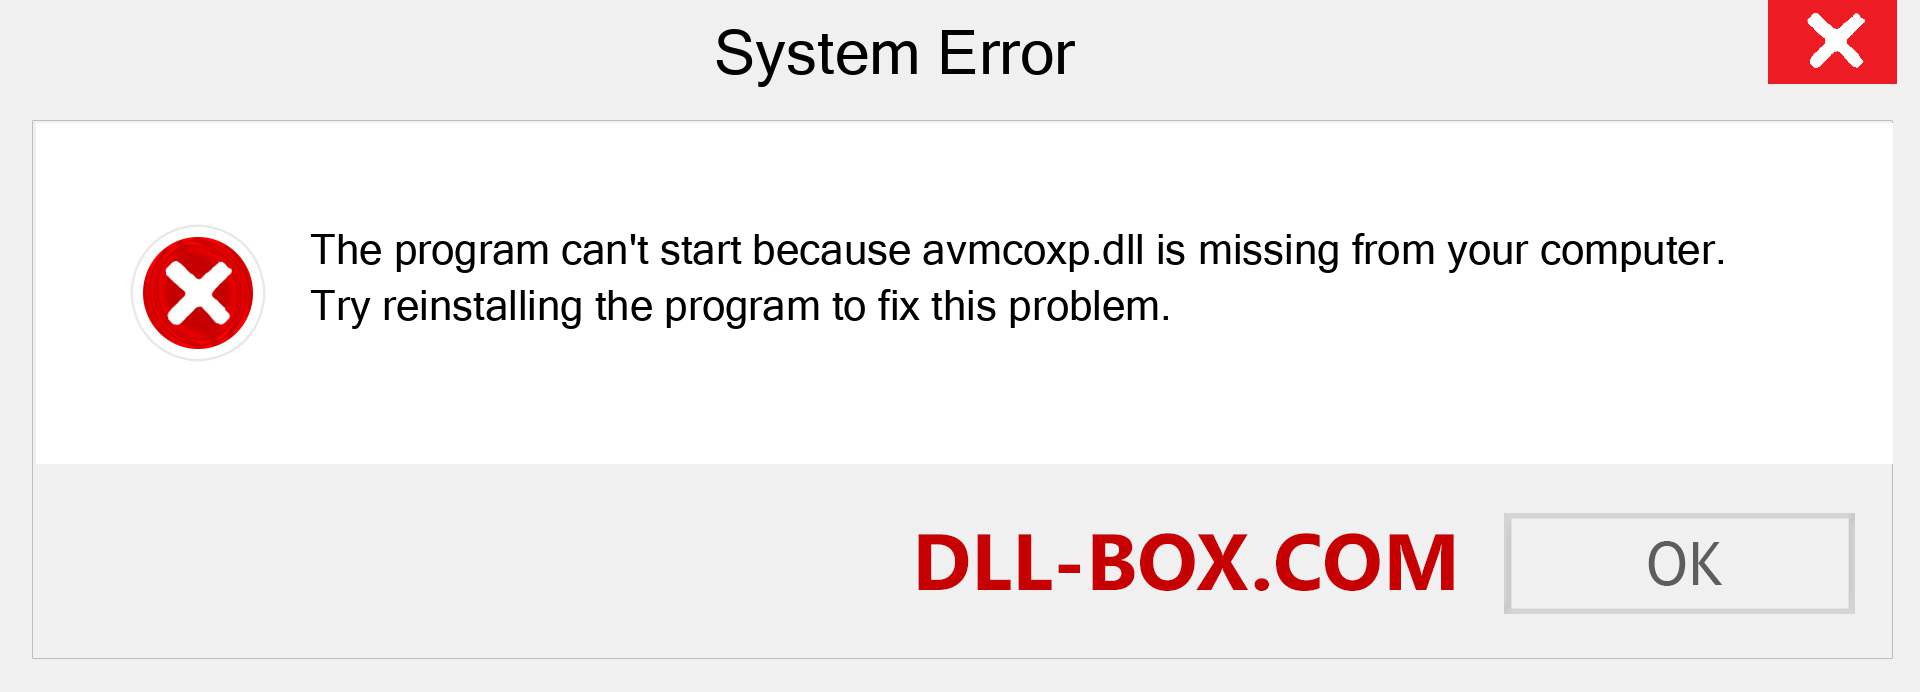  avmcoxp.dll file is missing?. Download for Windows 7, 8, 10 - Fix  avmcoxp dll Missing Error on Windows, photos, images